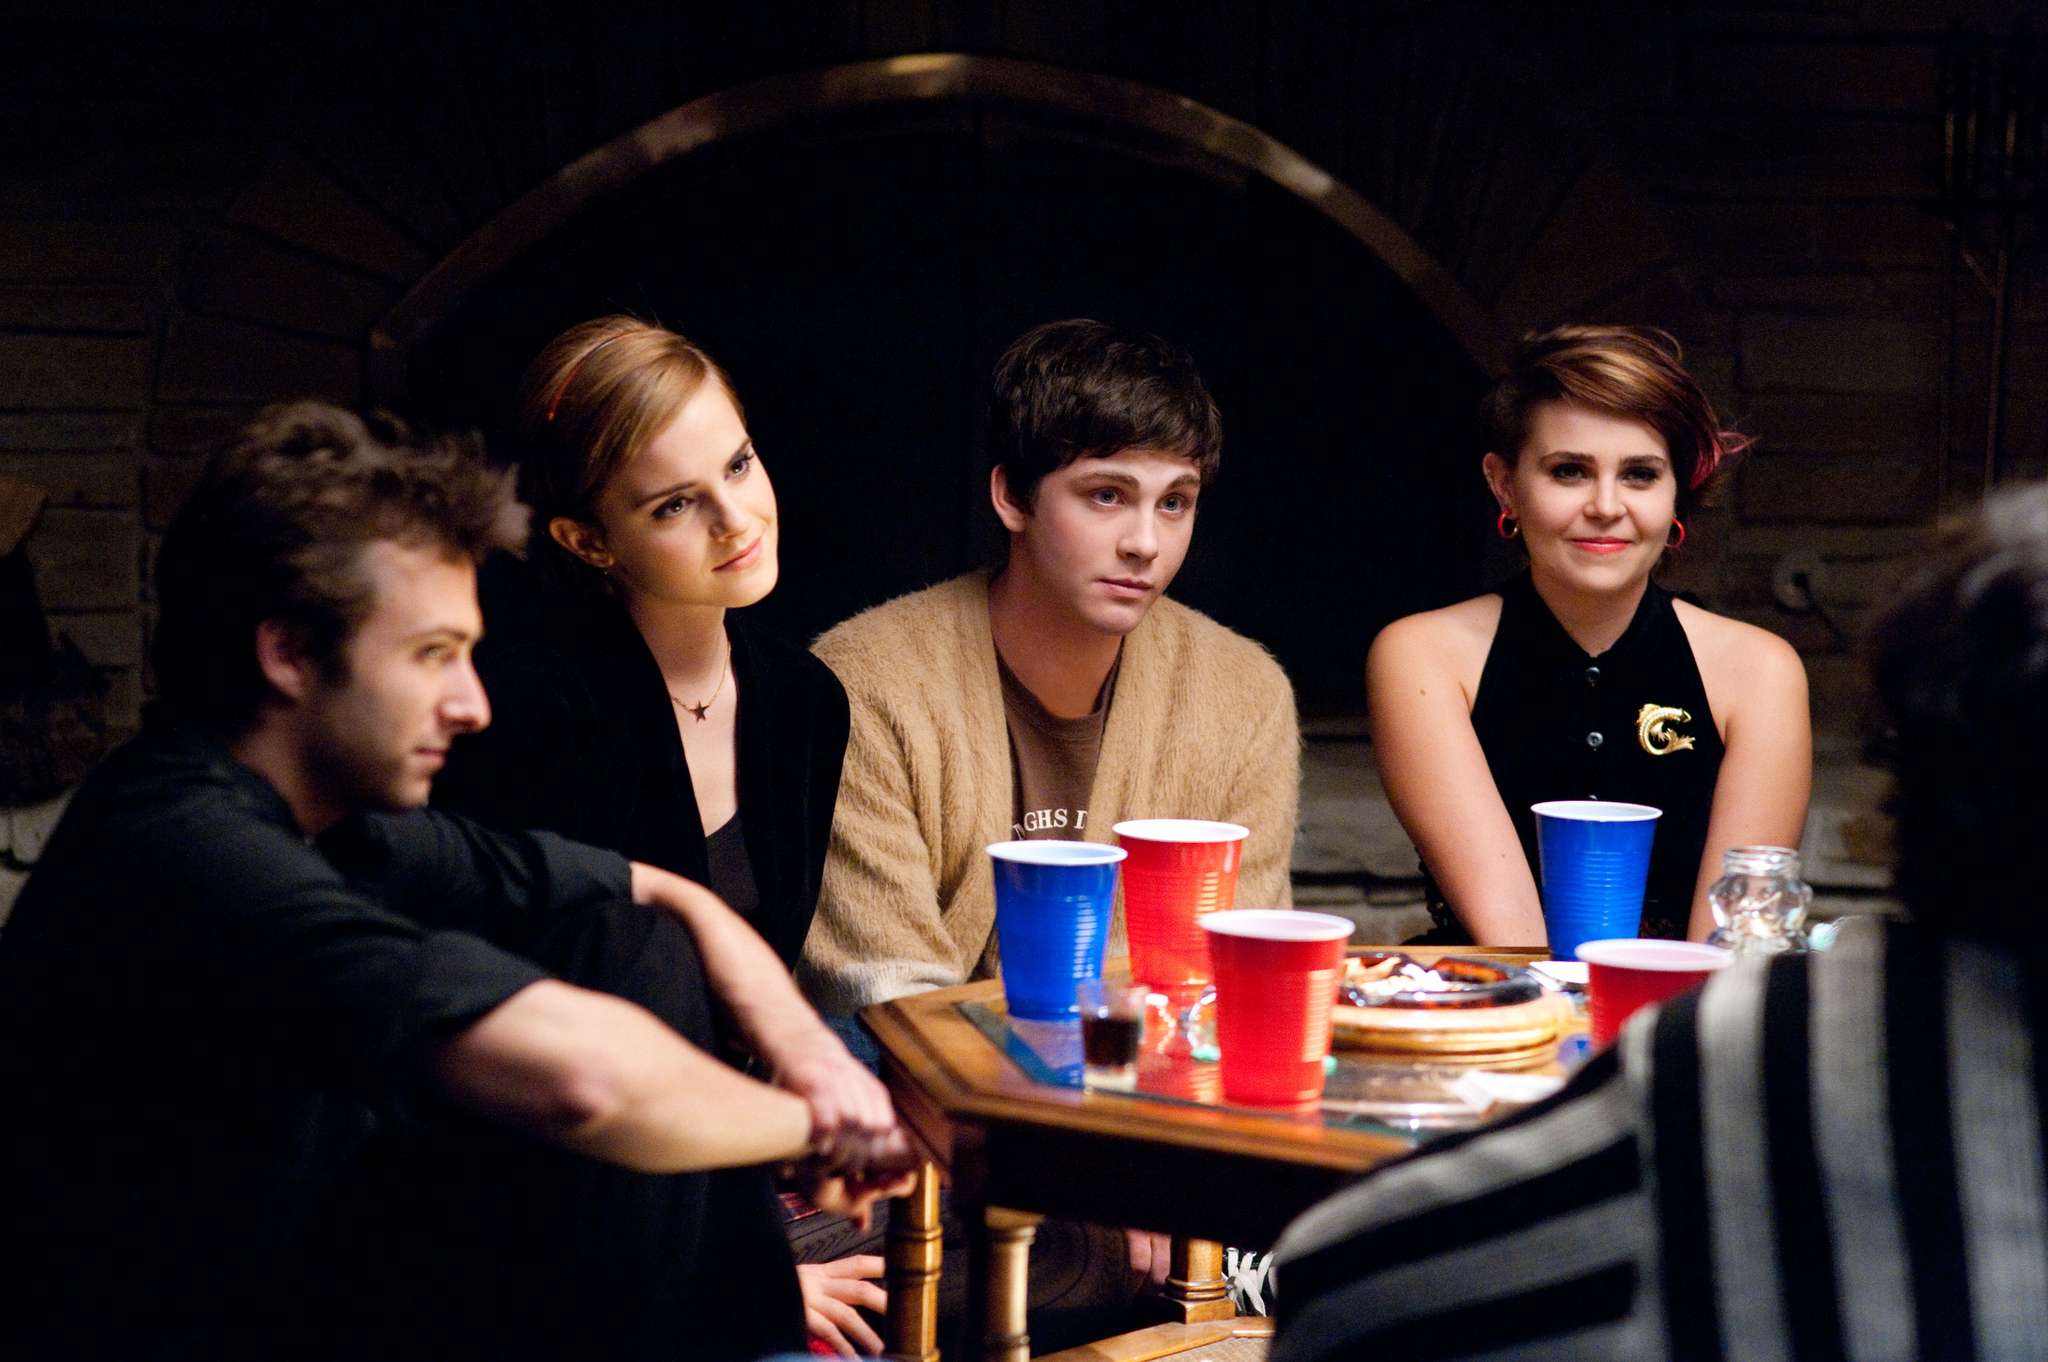 (L-R) REECE THOMPSON, EMMA WATSON, LOGAN LERMAN and MAE WHITMAN star in THE PERKS OF BEING A WALLFLOWERPh: John Bramley© 2011 Summit Entertainment, LLC.  All rights reserved.